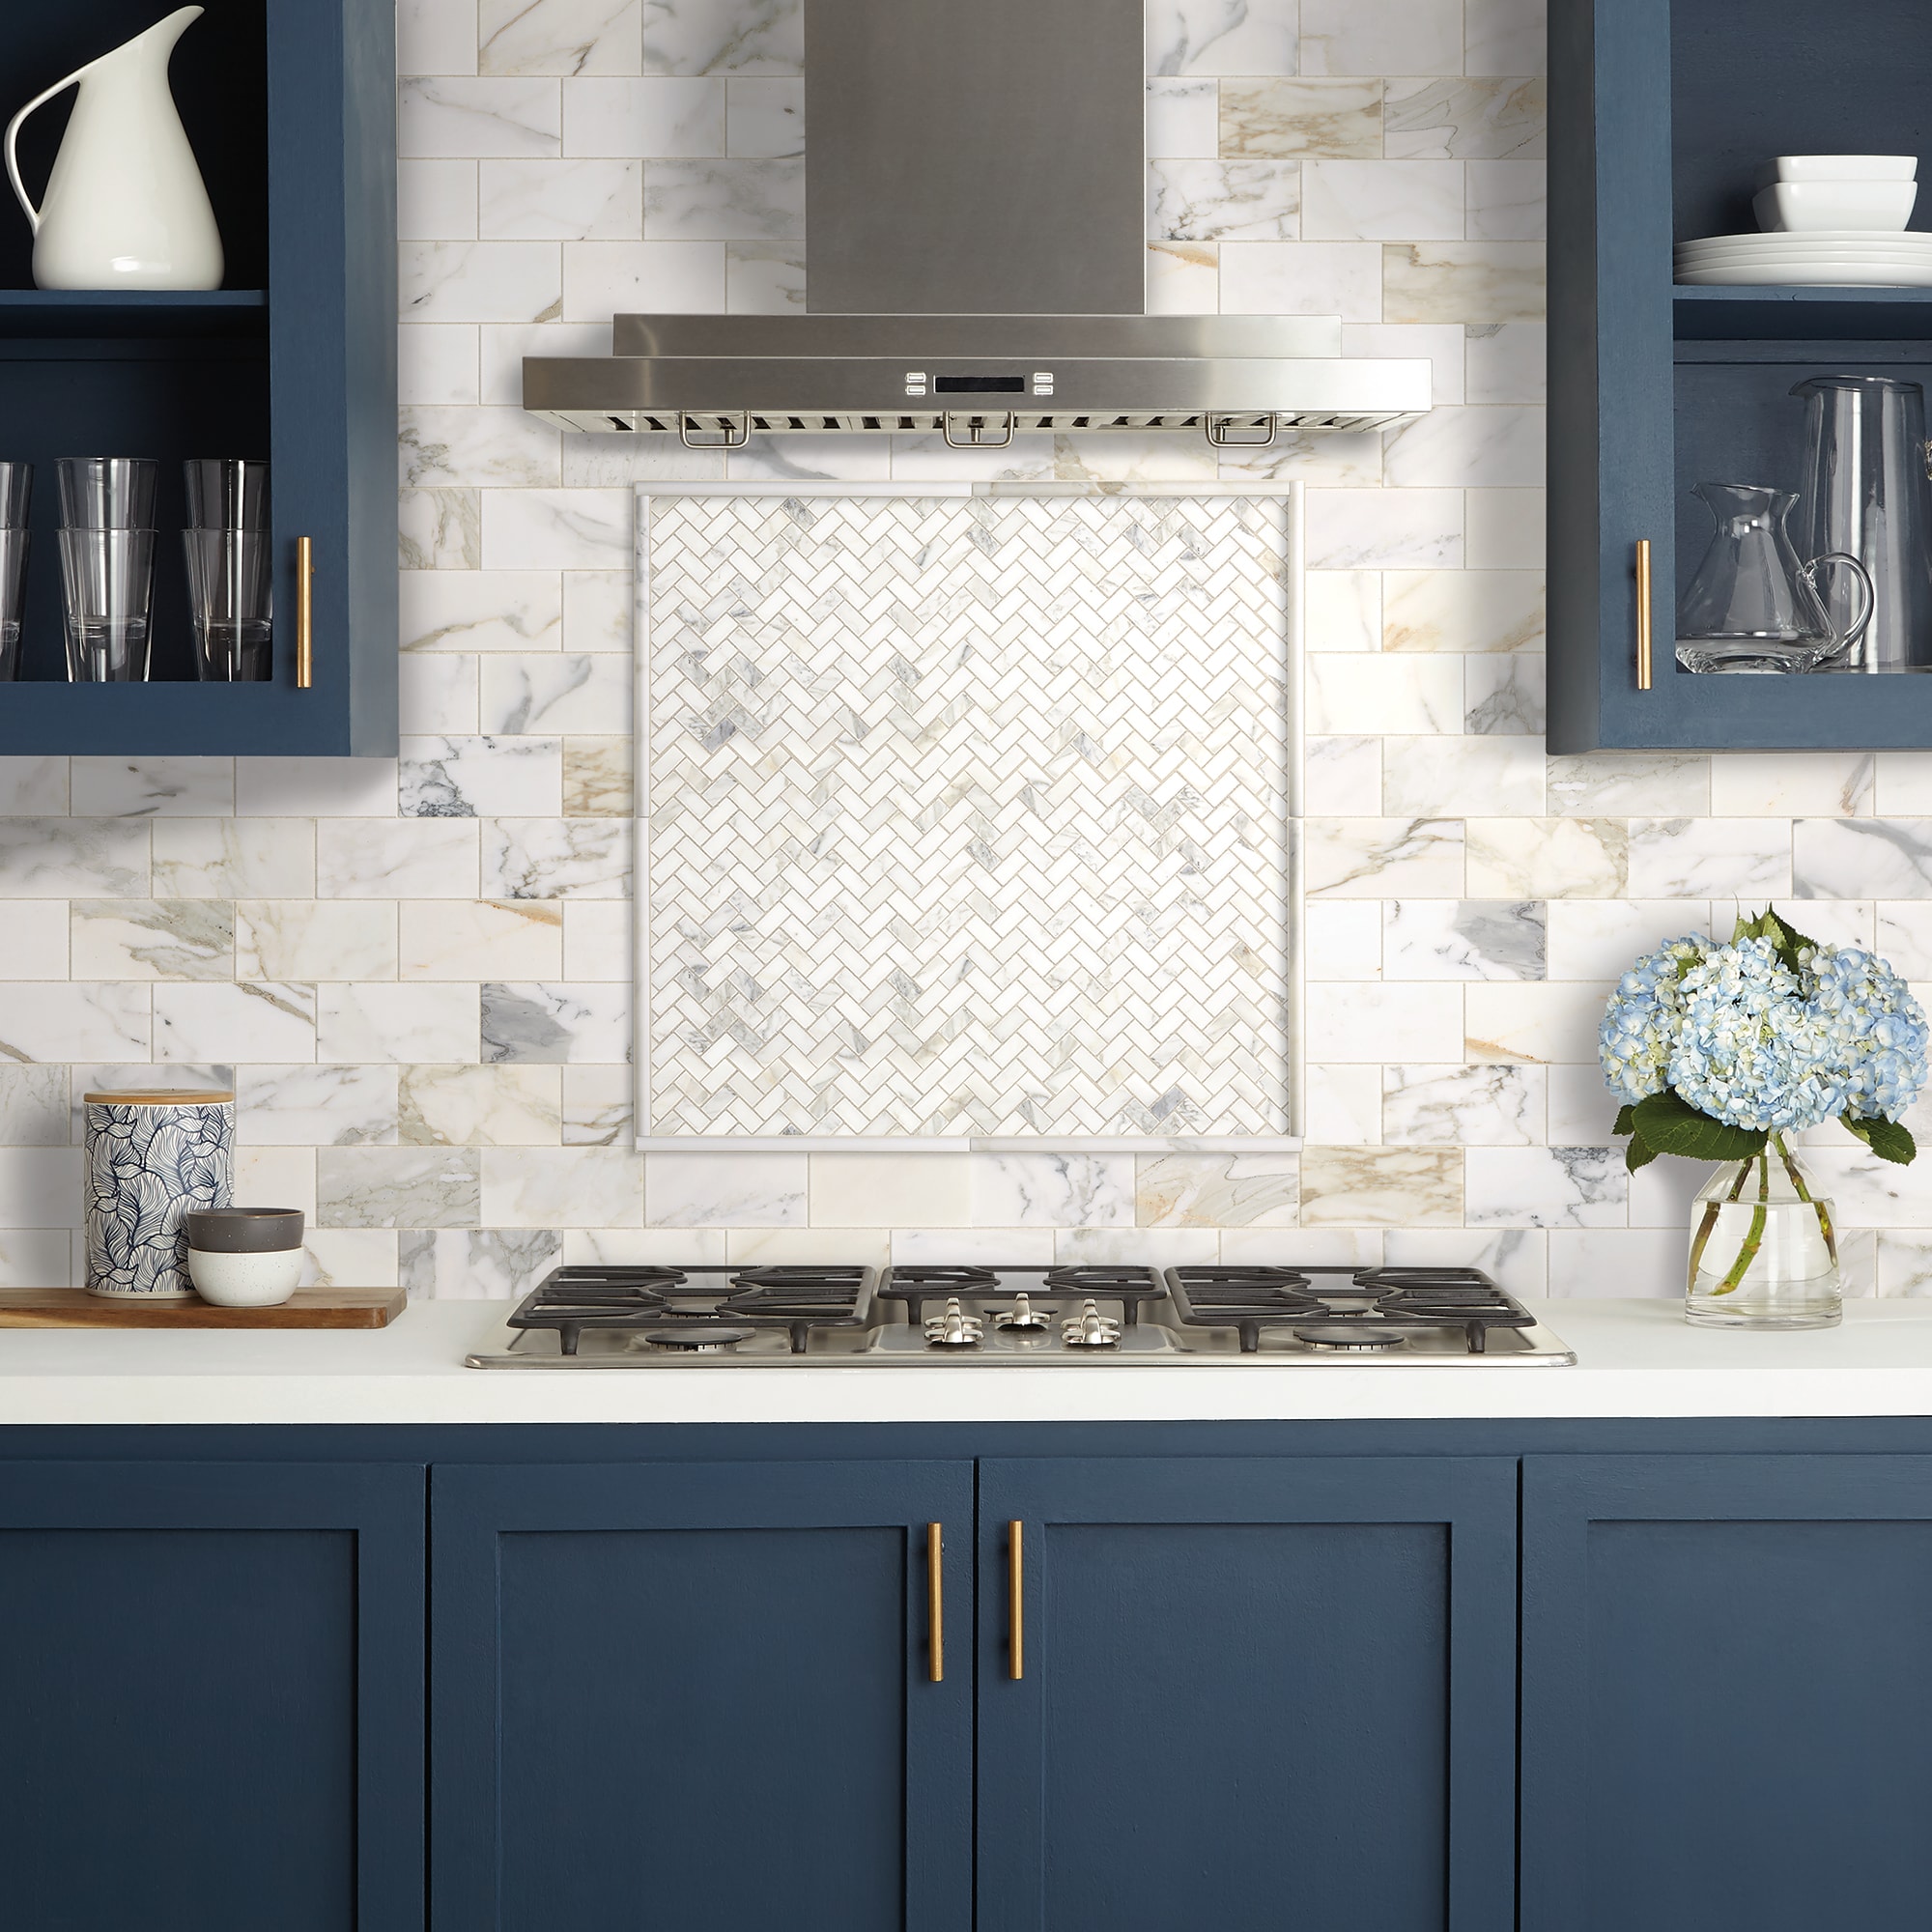 White and Gold Kitchen with Black Herringbone Floor Tiles